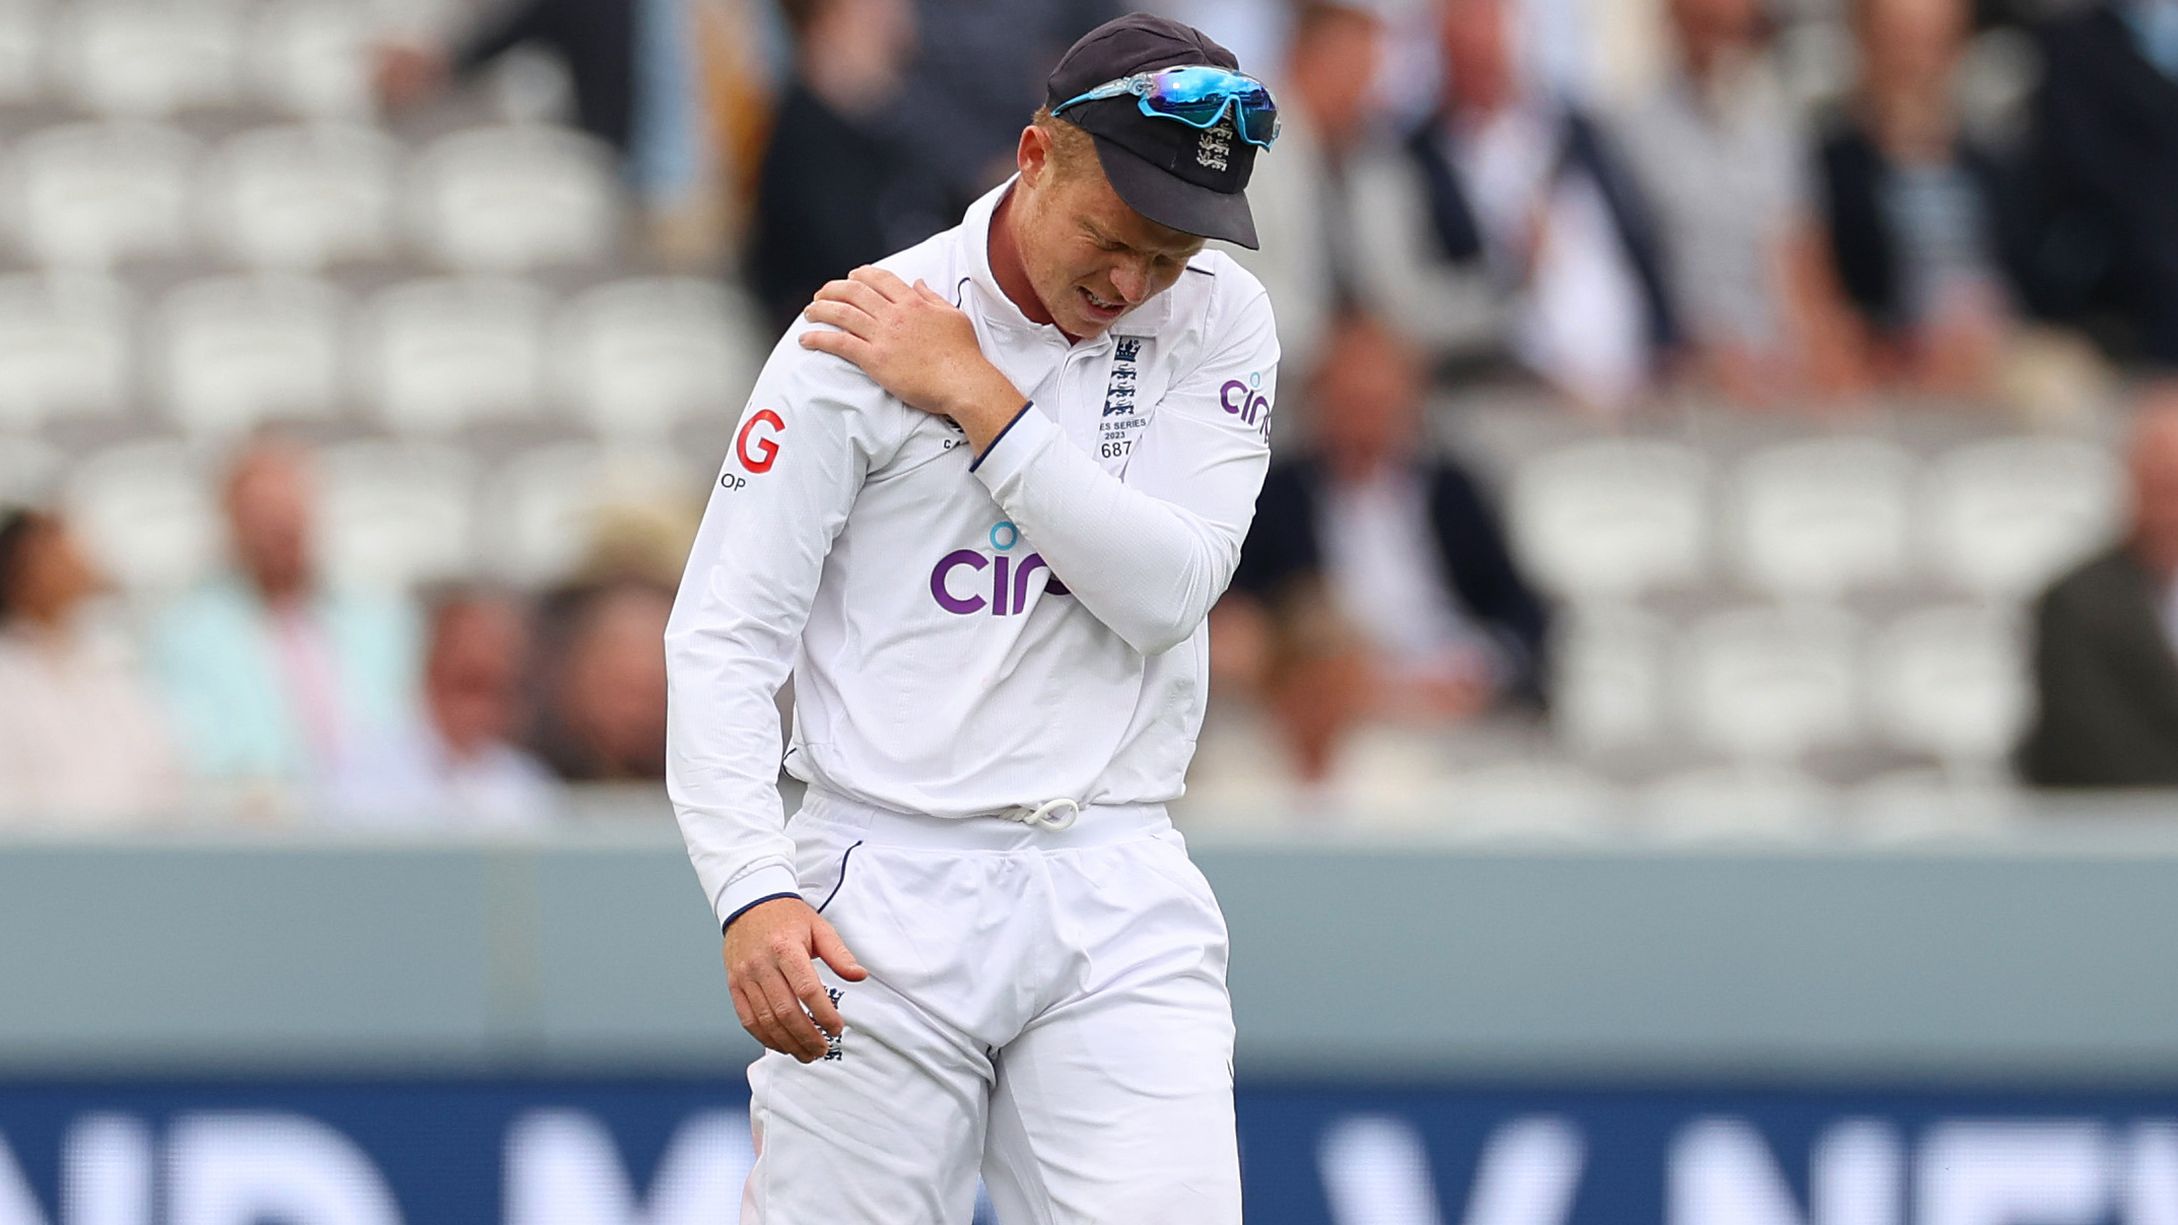 England star was 'falling asleep' during Ashes due to painkiller medication